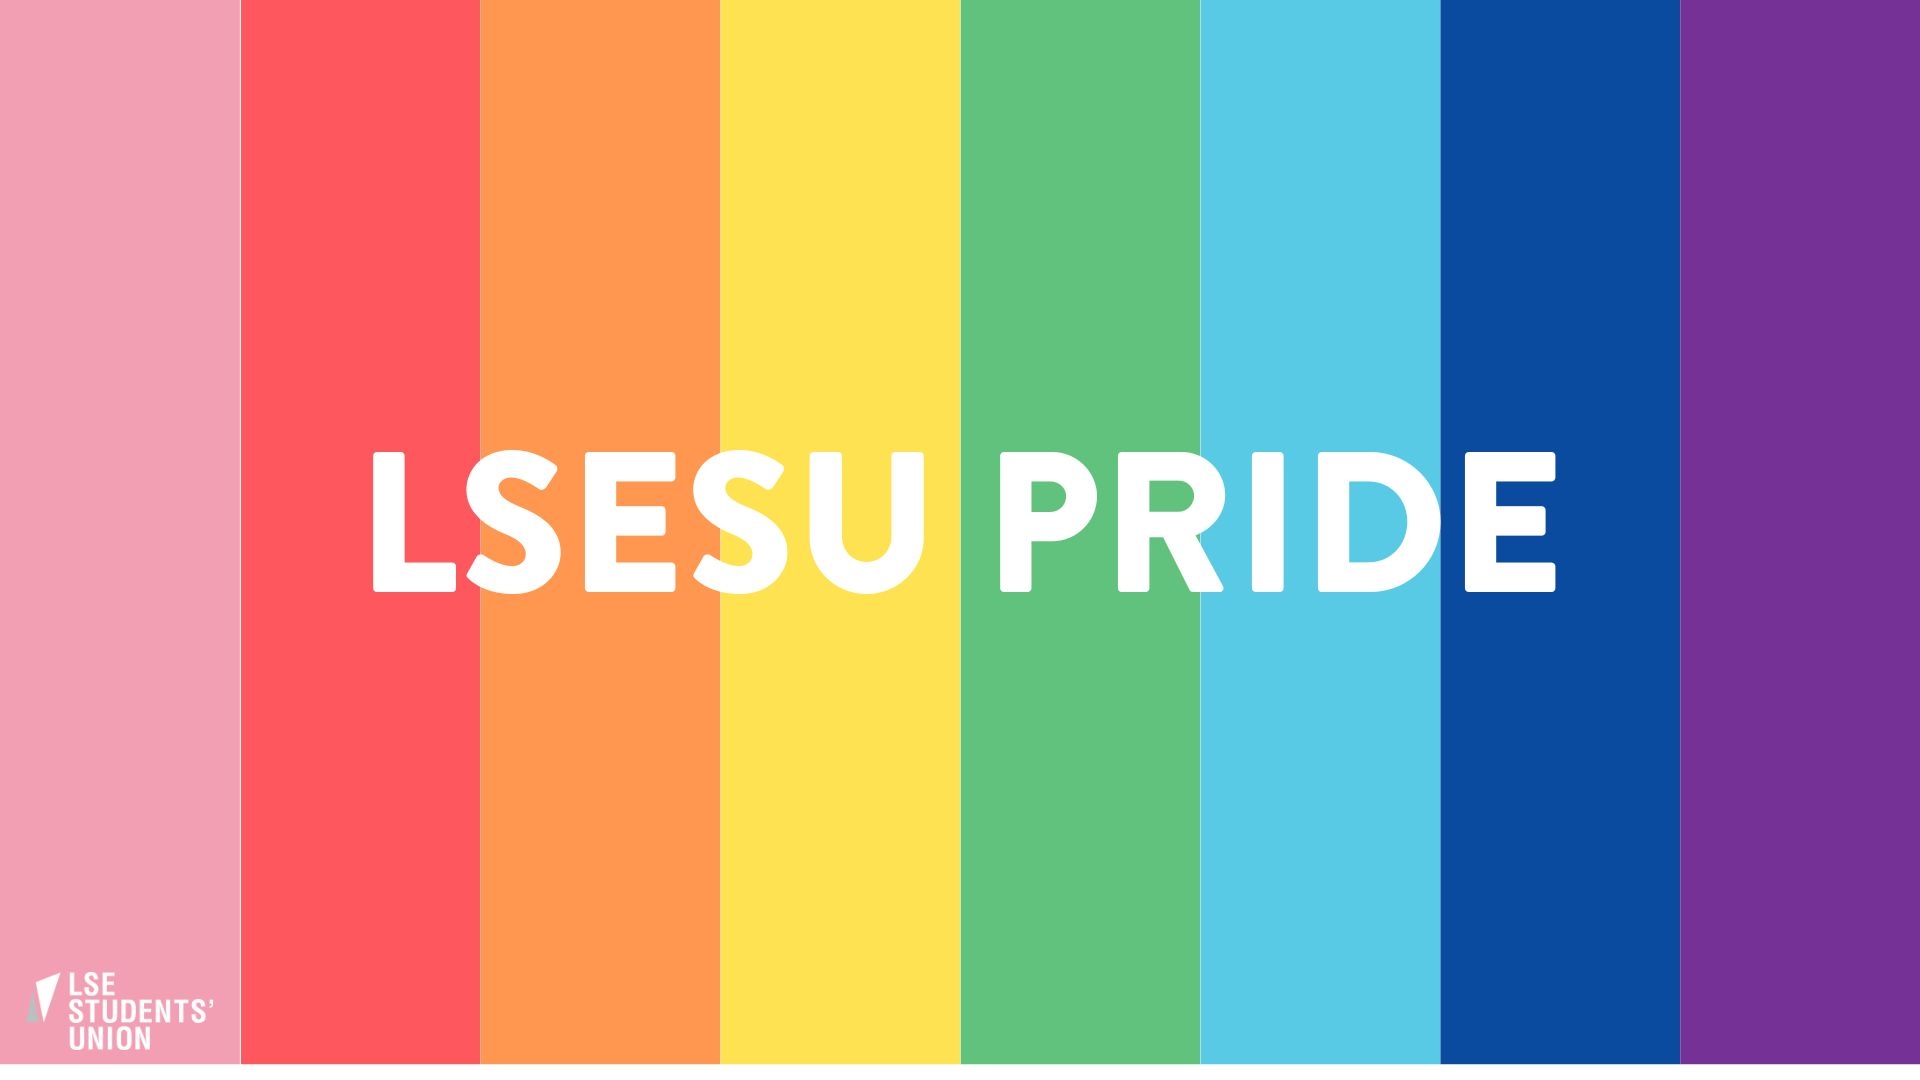 LSESU are dedicated in expanding LGBTQIA+ visibility on campus, building the community, and ensuring that queer LSE students receive support.